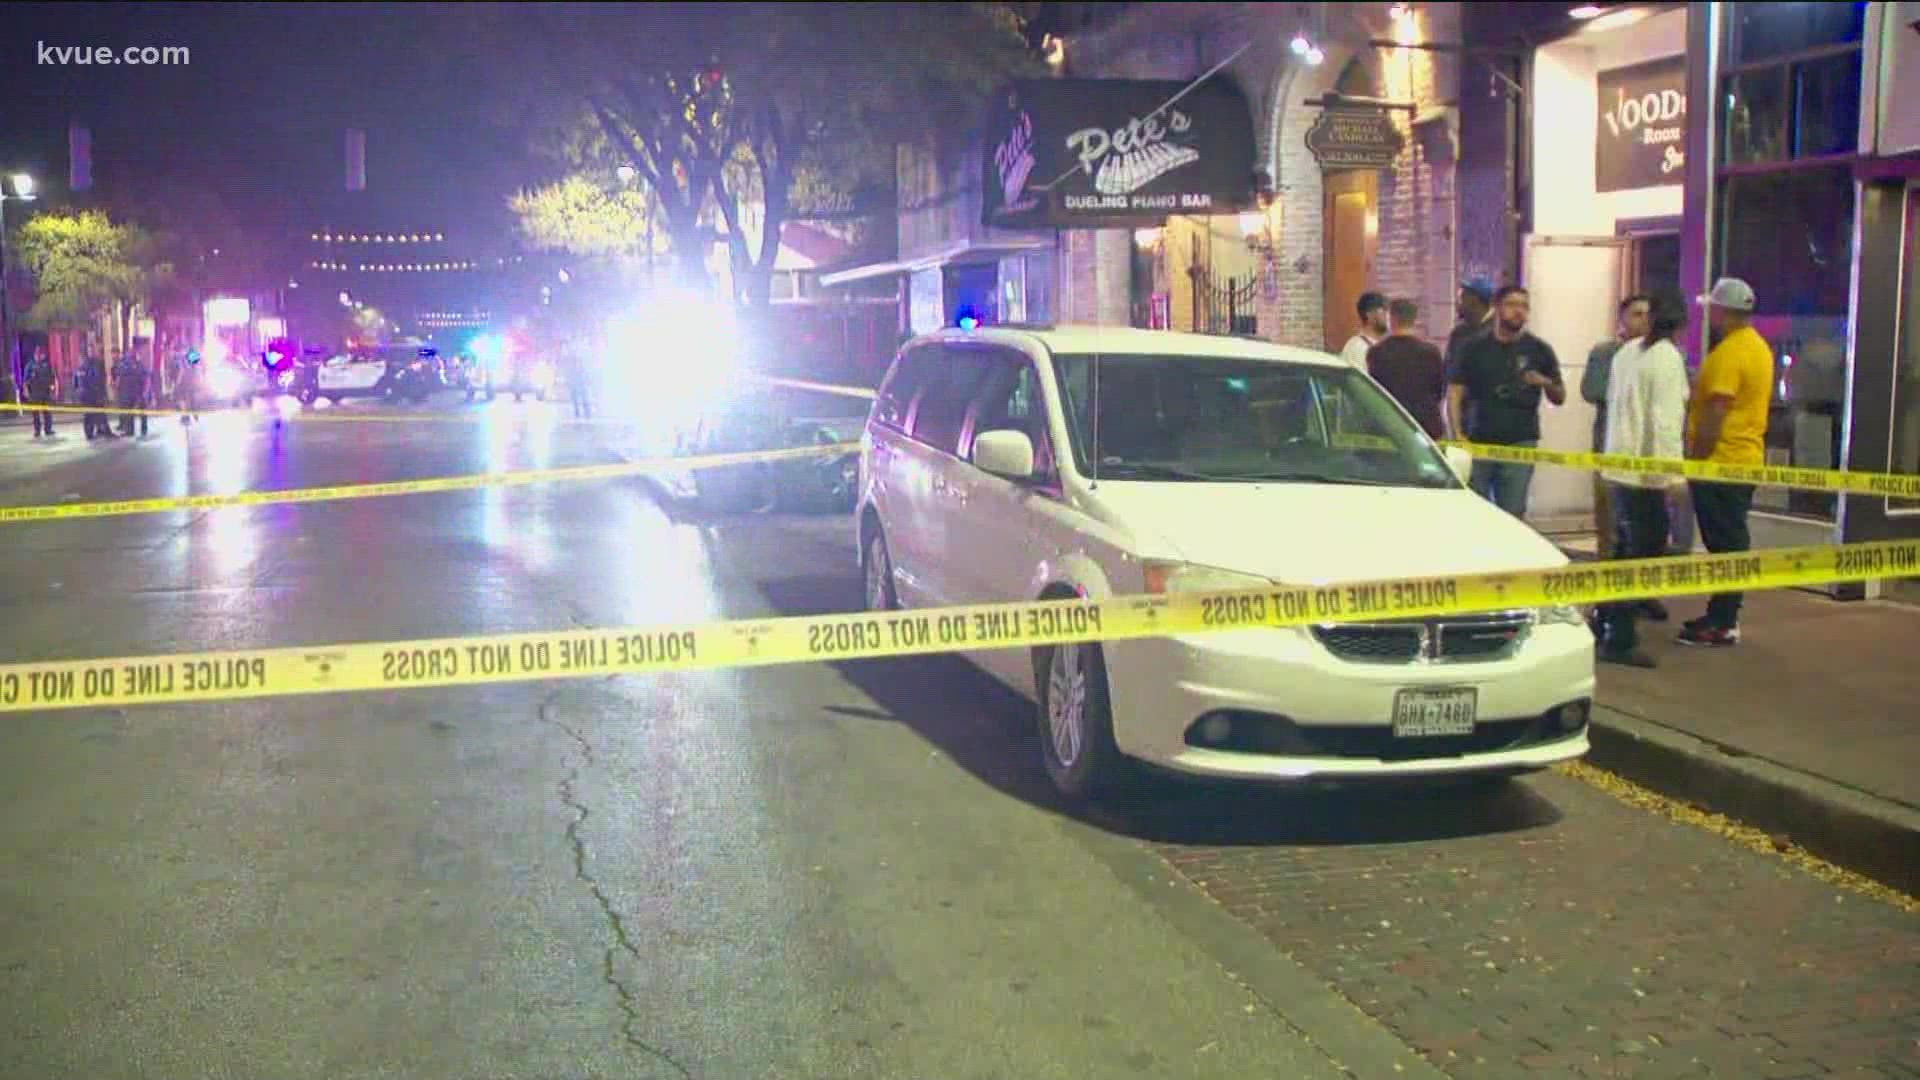 For the second time in a week, there was a shooting on Sixth Street in Downtown Austin.